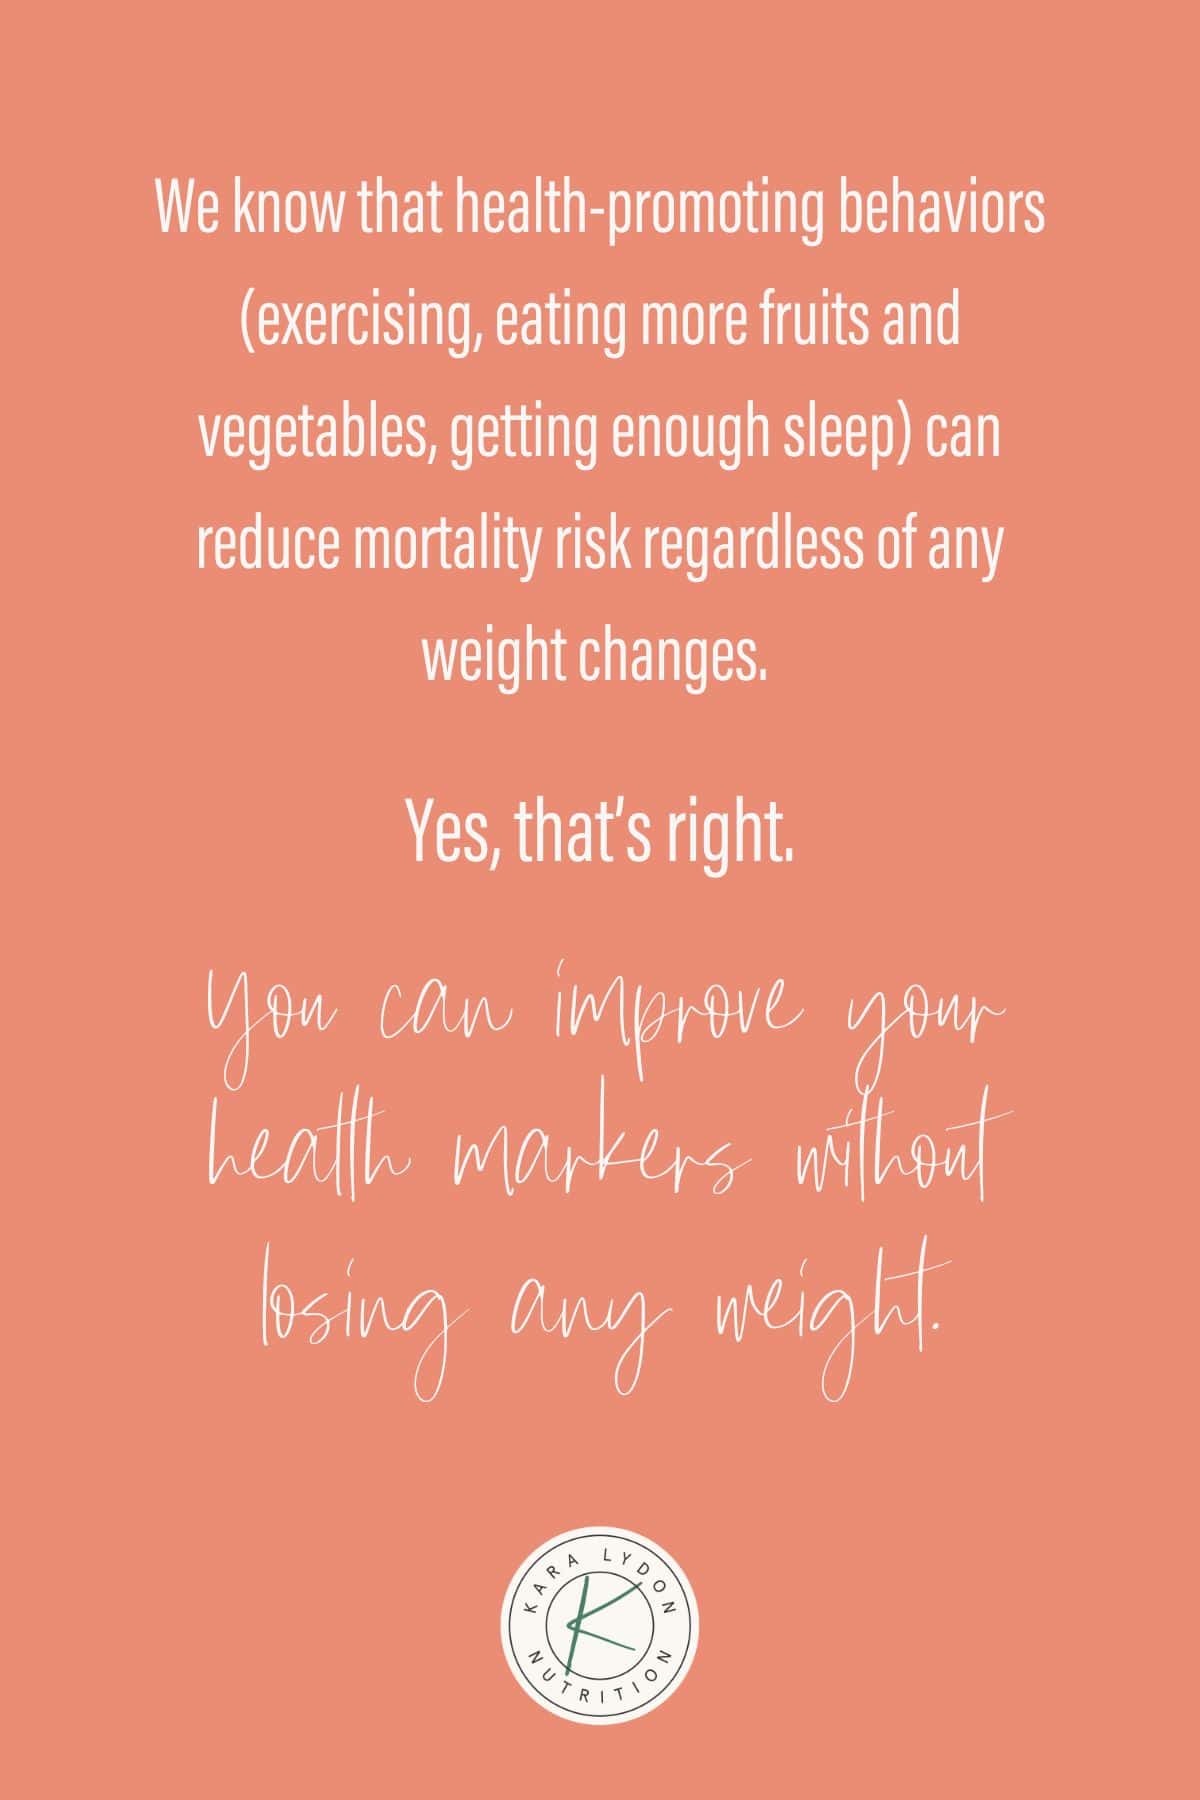 Graphic with quote: "We know that health-promoting behaviors (exercise, eating more fruits and vegetables, getting enough sleep) can reduce mortality risk regardless of any weight changes.  Yes correctly.  You can improve your health indicators without losing weight."